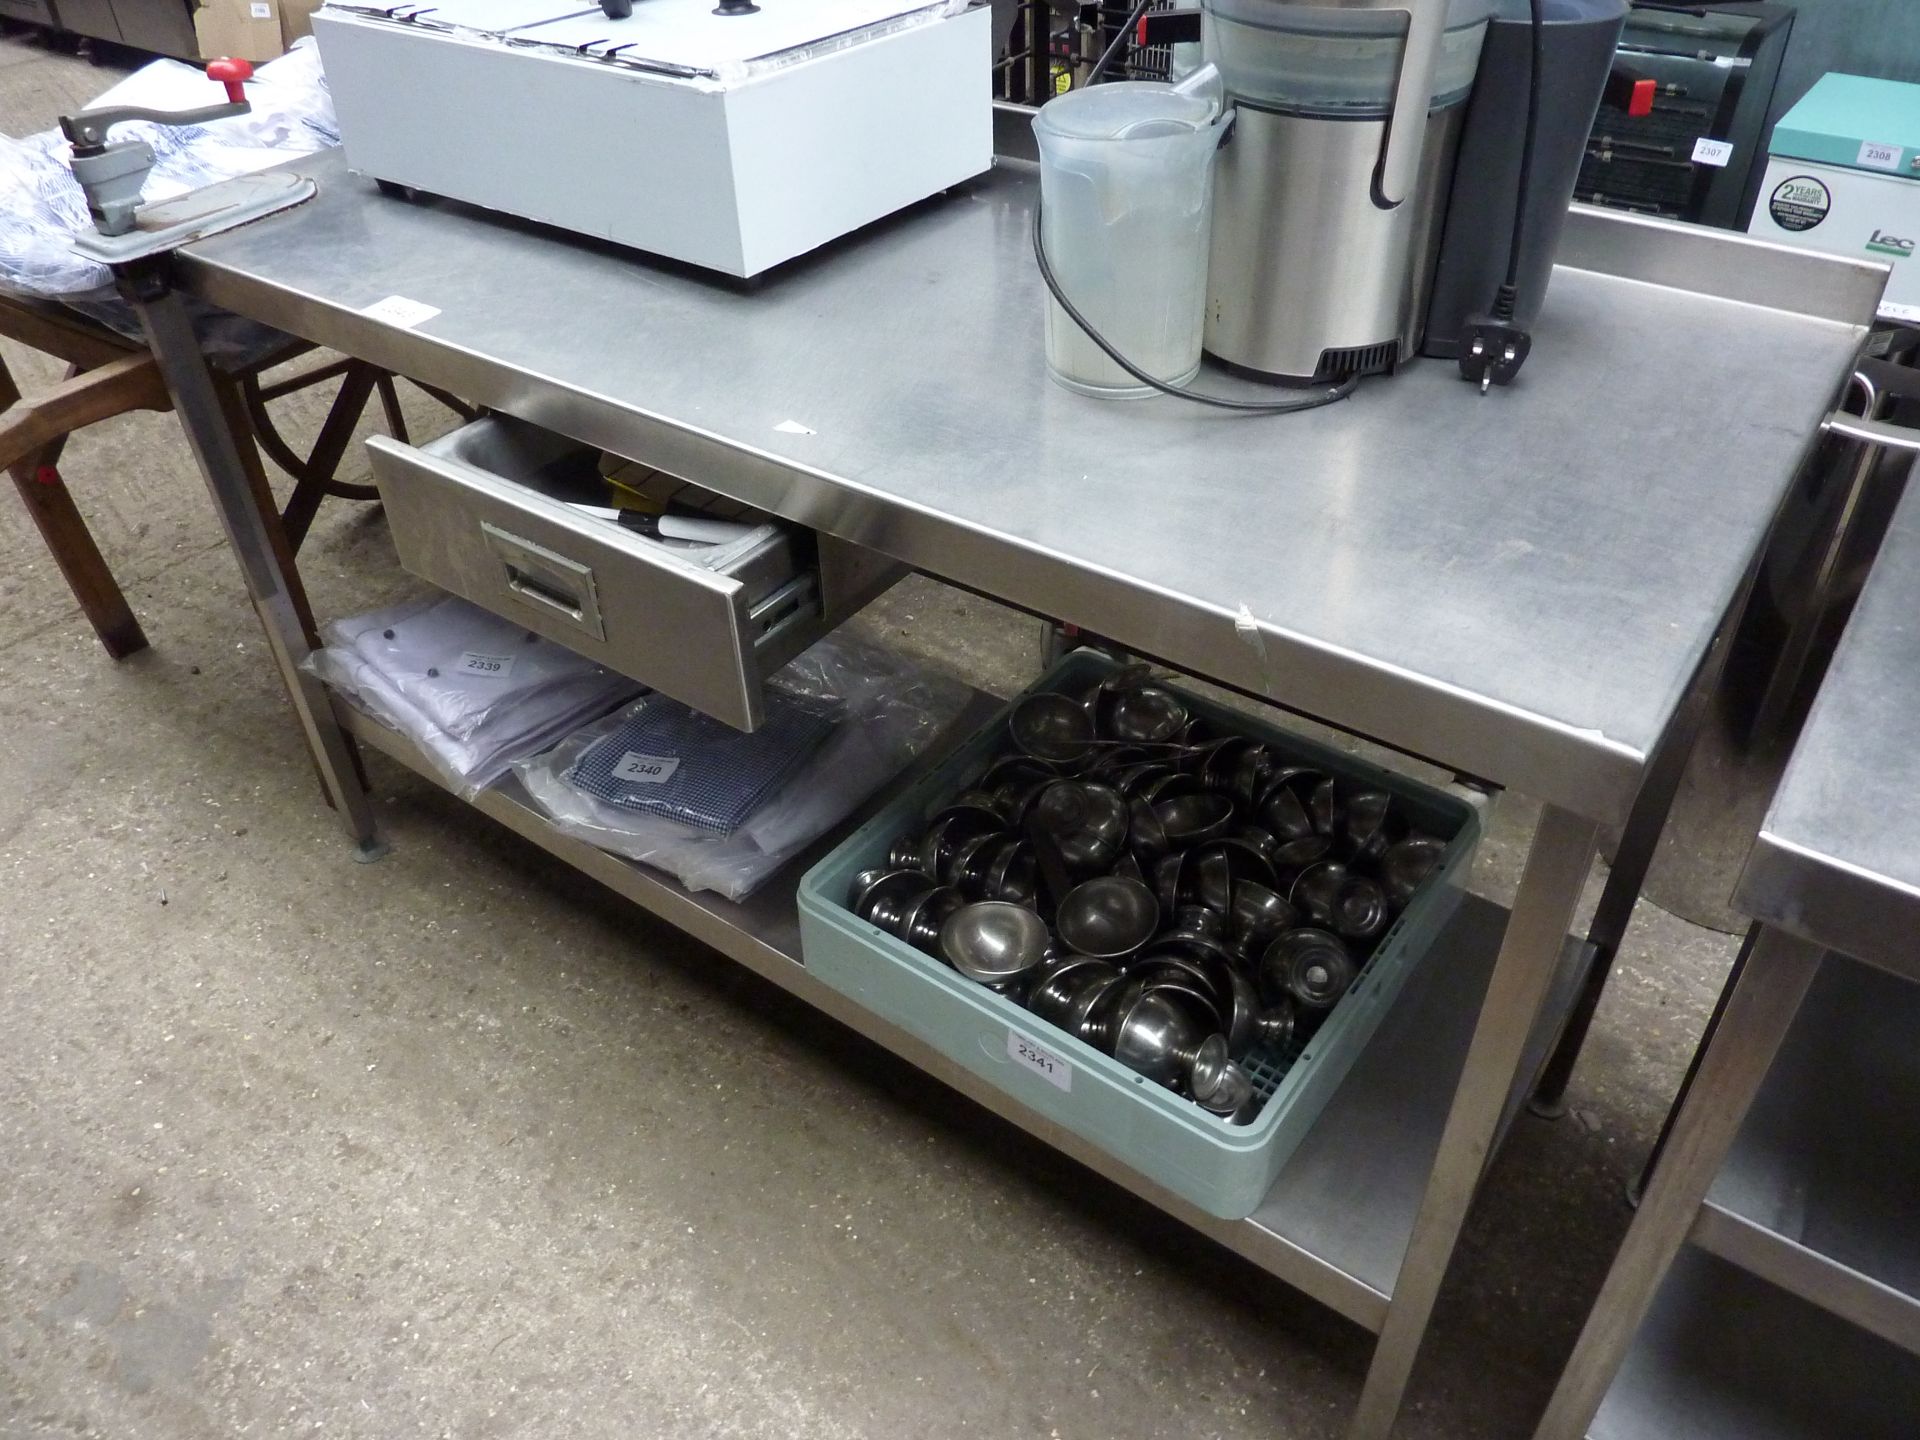 Stainless steel prep table with drawer, shelf and tin opener